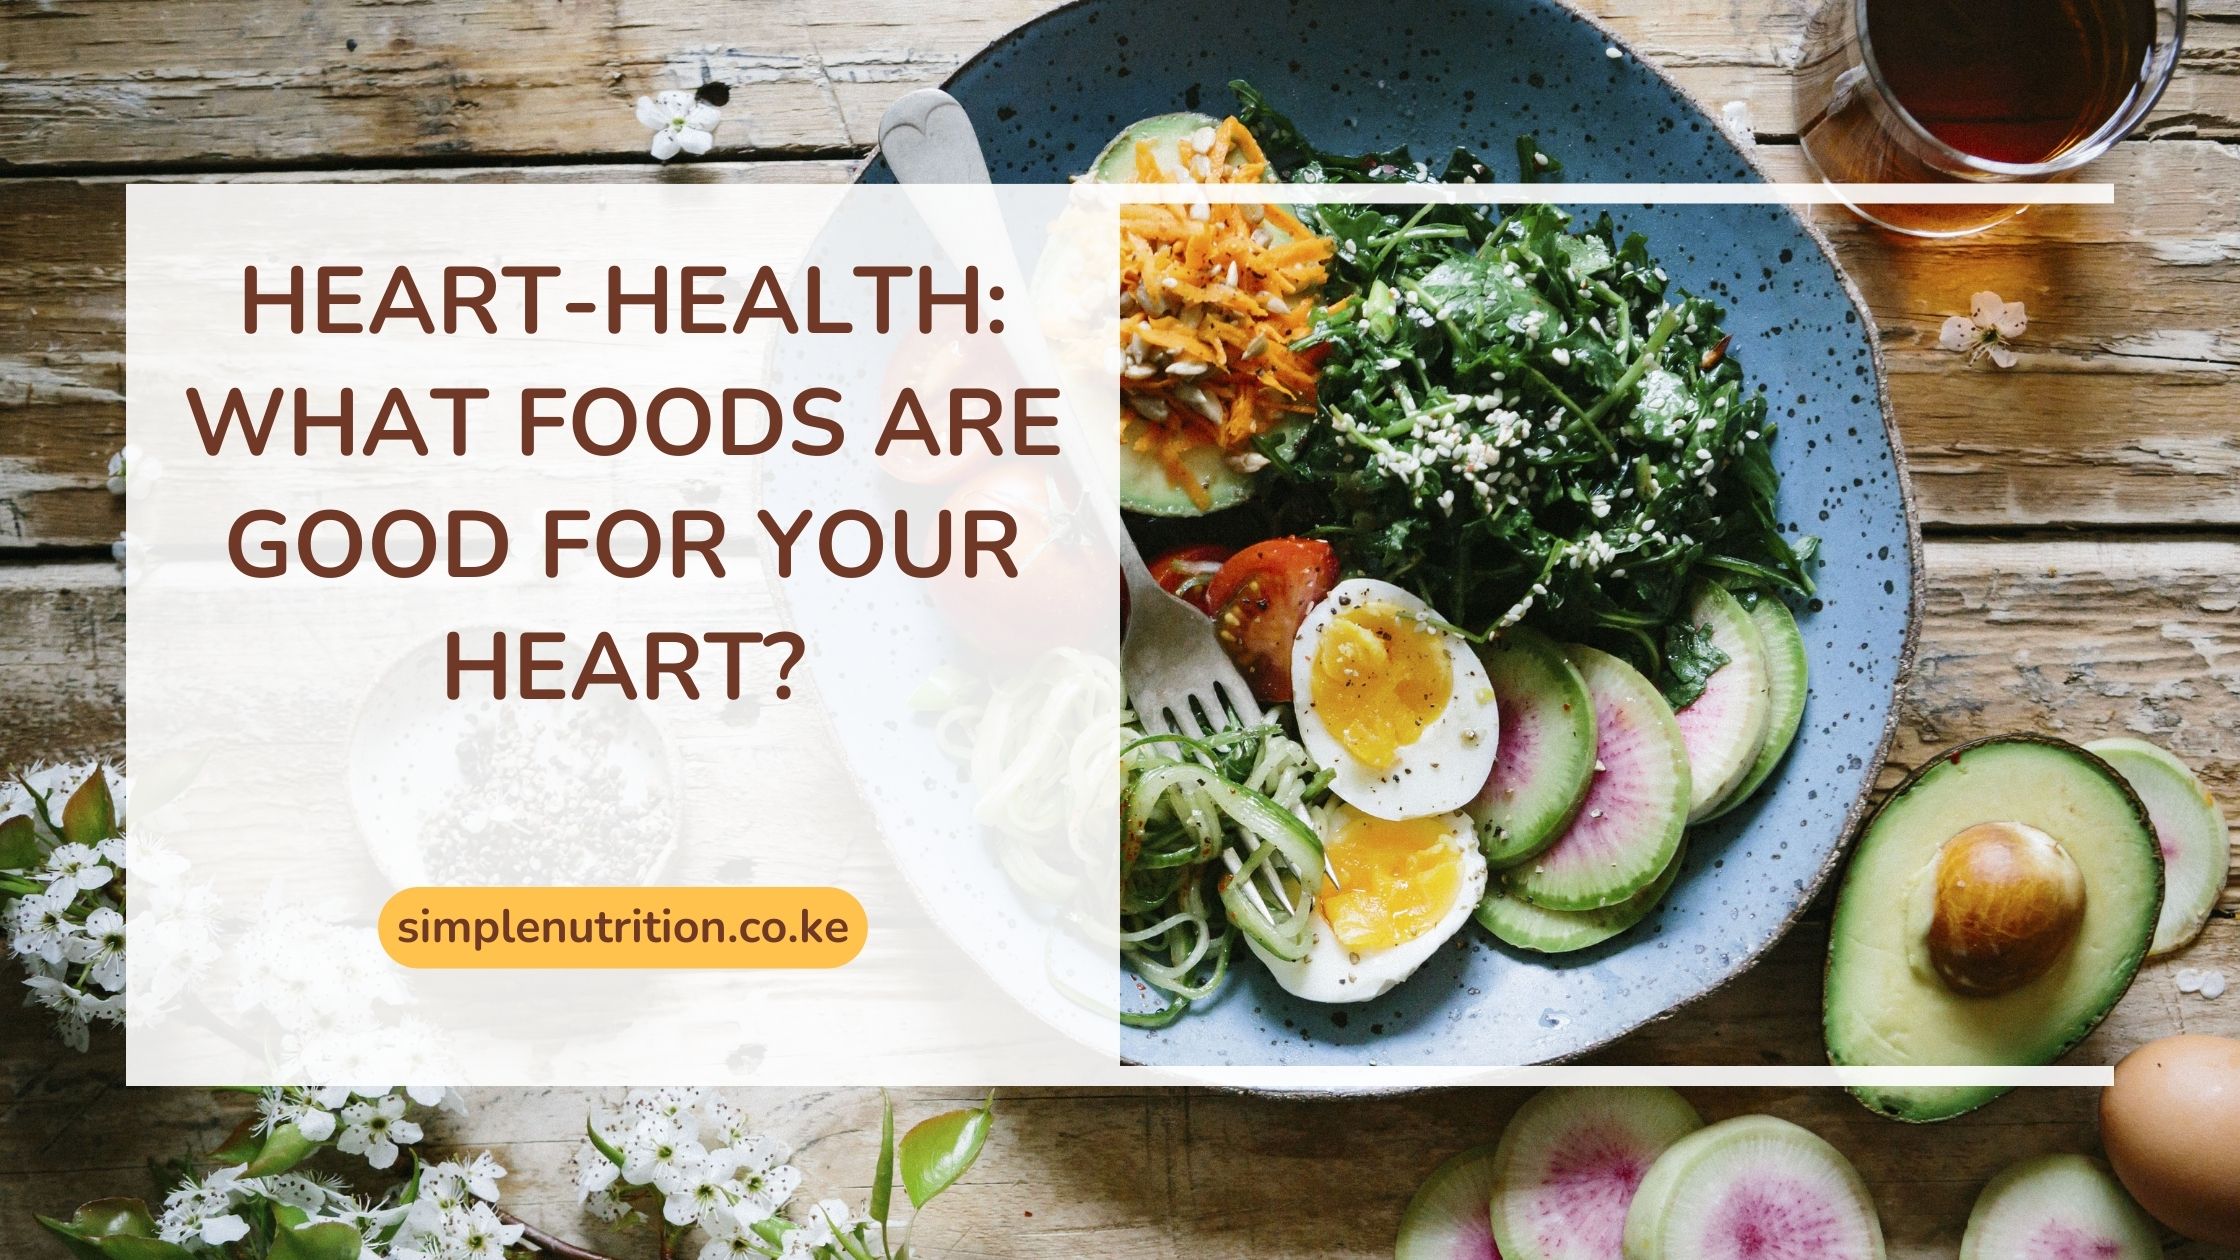 Heart-Health: What foods are good for your heart?